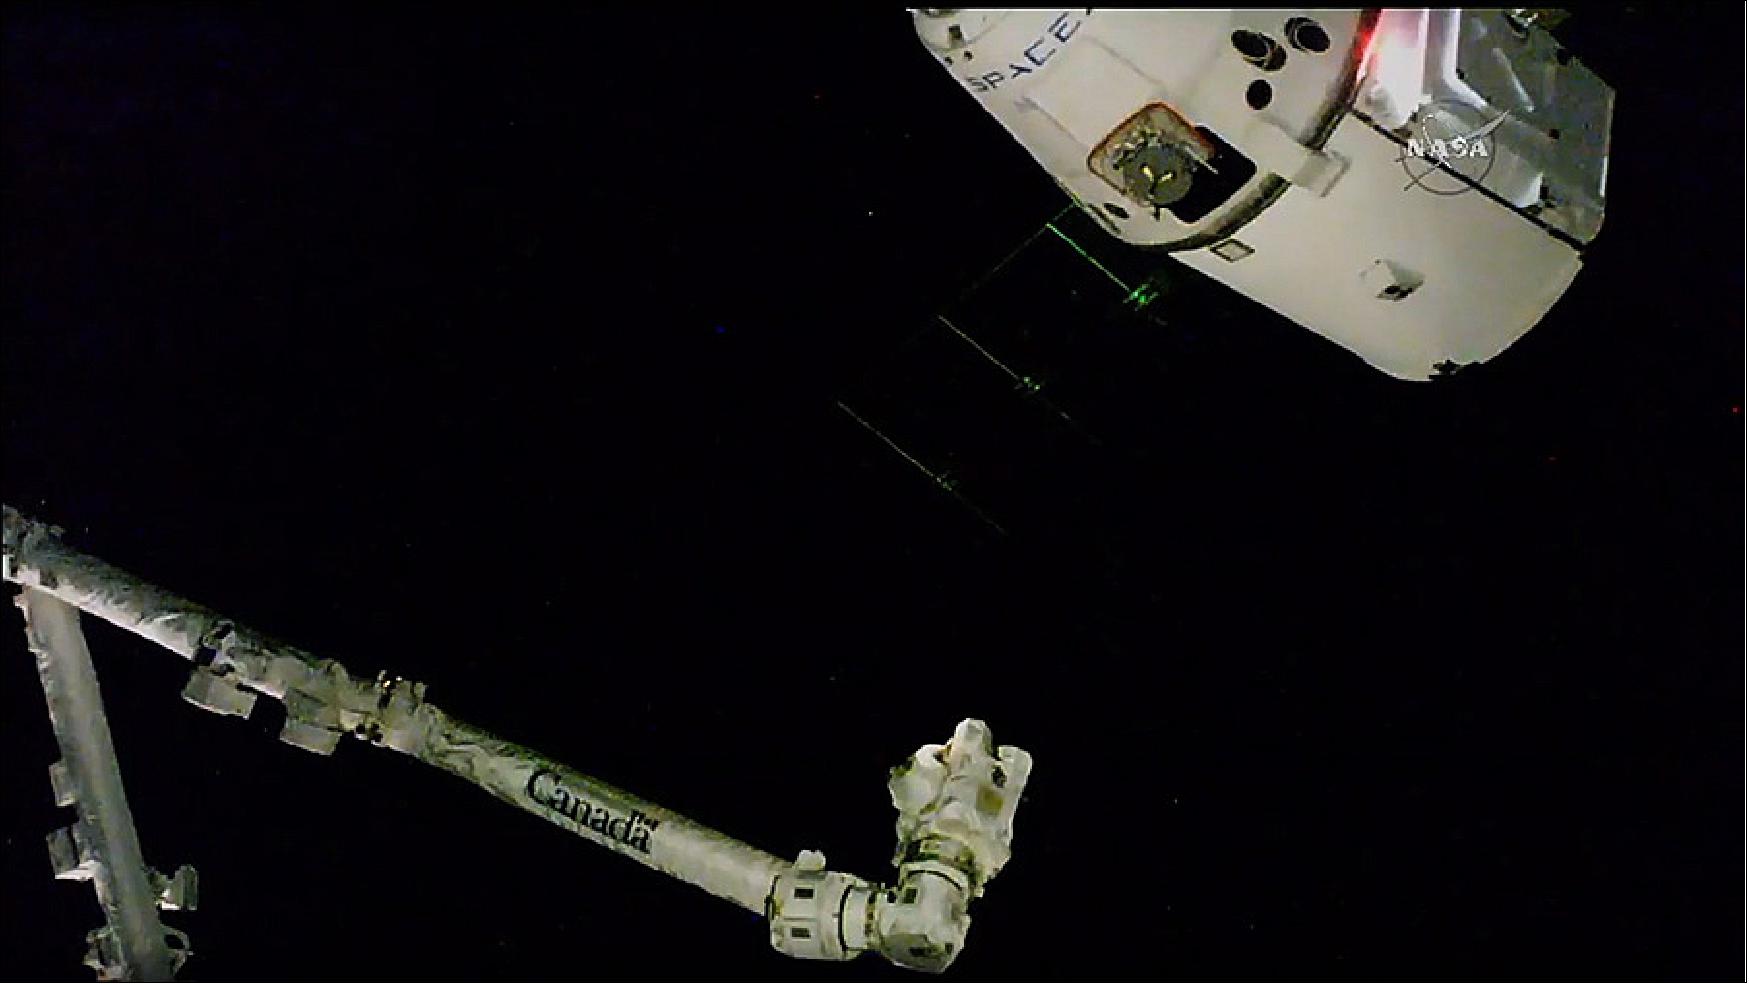 Figure 13: The Dragon resupply ship is pictured just 10 meters away from the space station’s Canadarm2 (image credit: NASA TV)